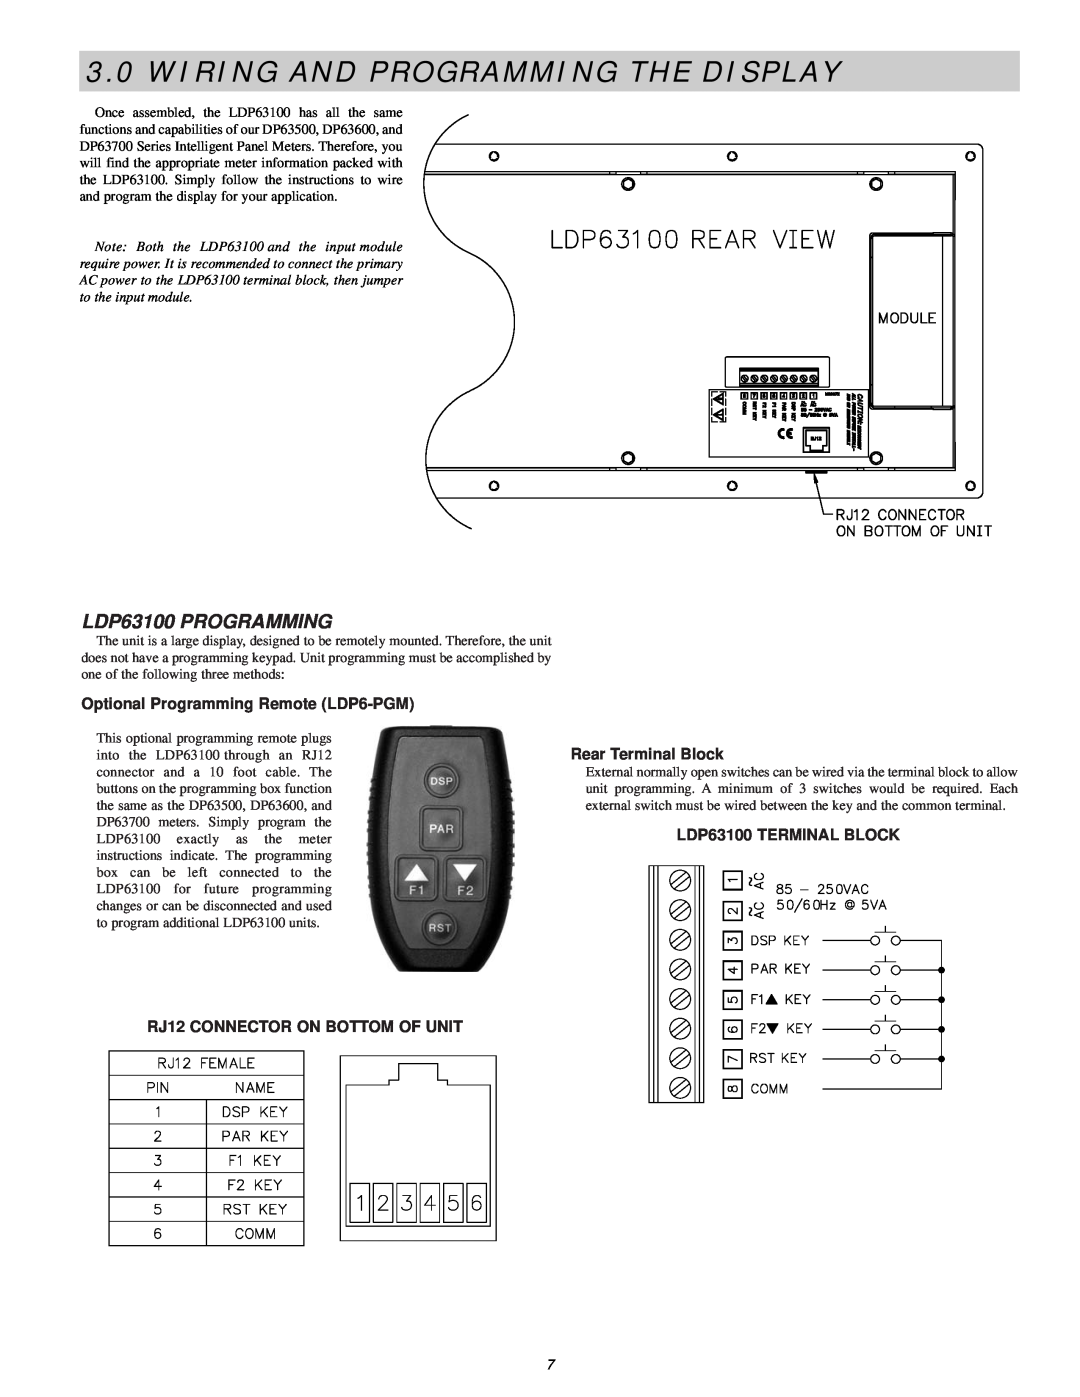 Omega Vehicle Security Wiring And Programming The Display, LDP63100 PROGRAMMING, Optional Programming Remote LDP6-PGM 